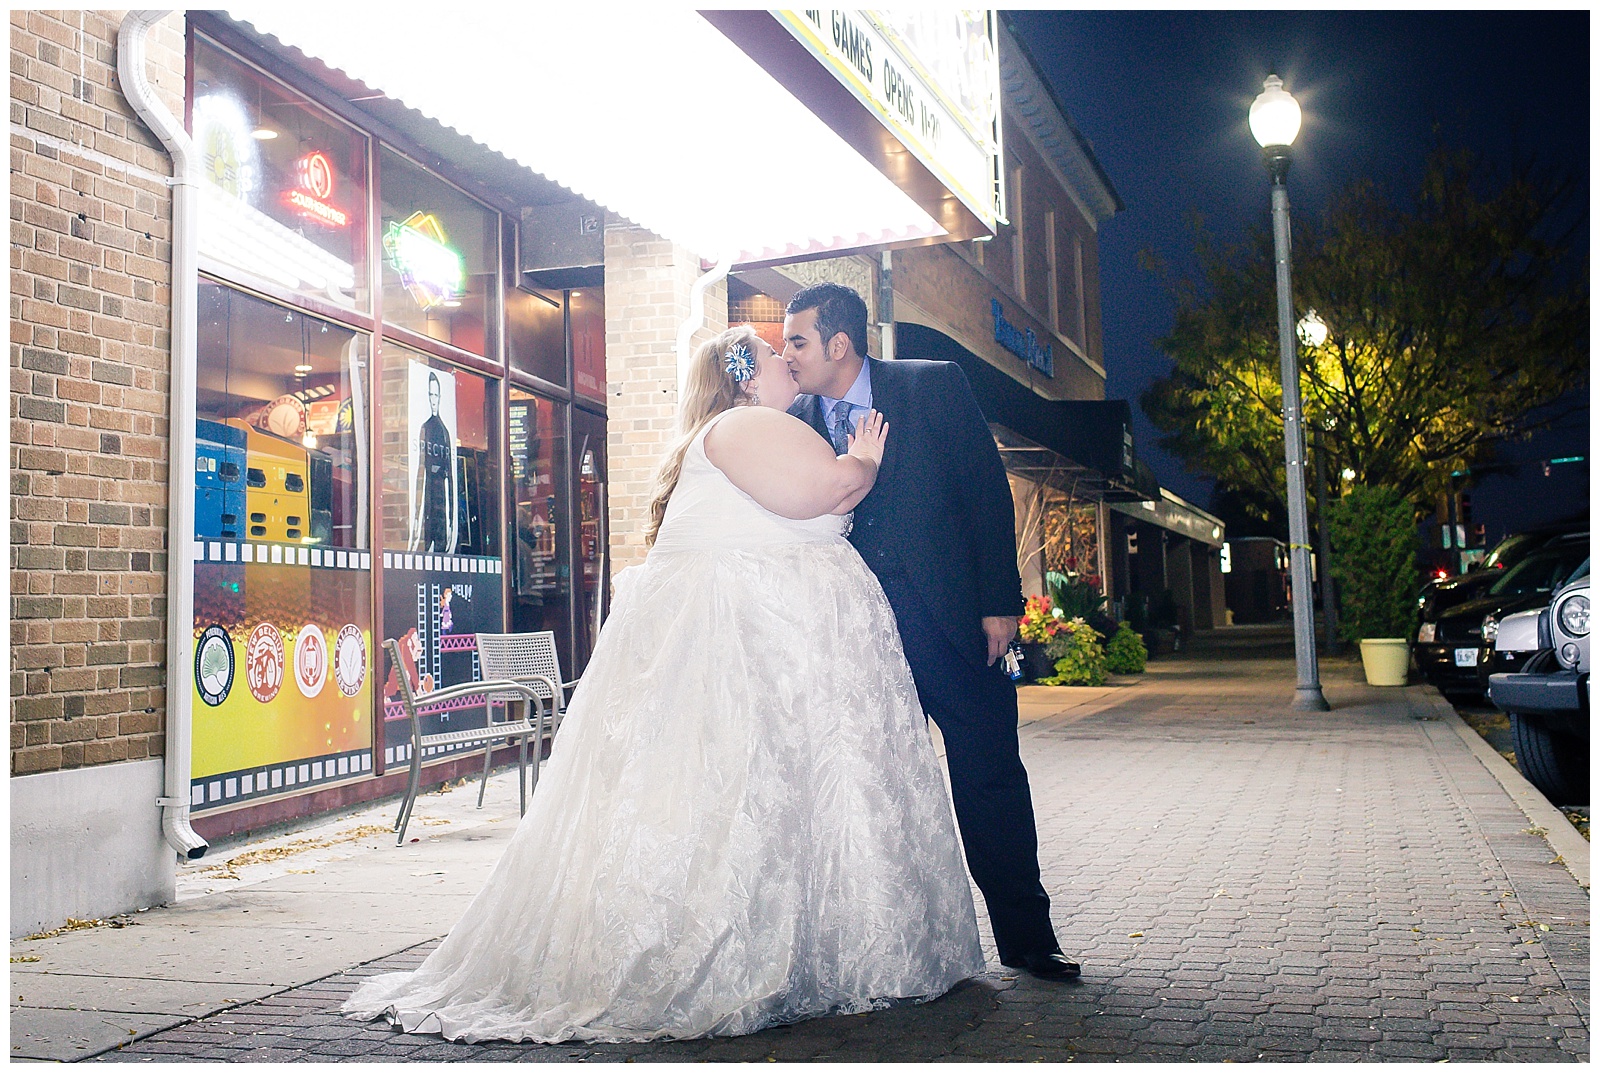 Wedding photography at Armour Theatre in Kansas City.